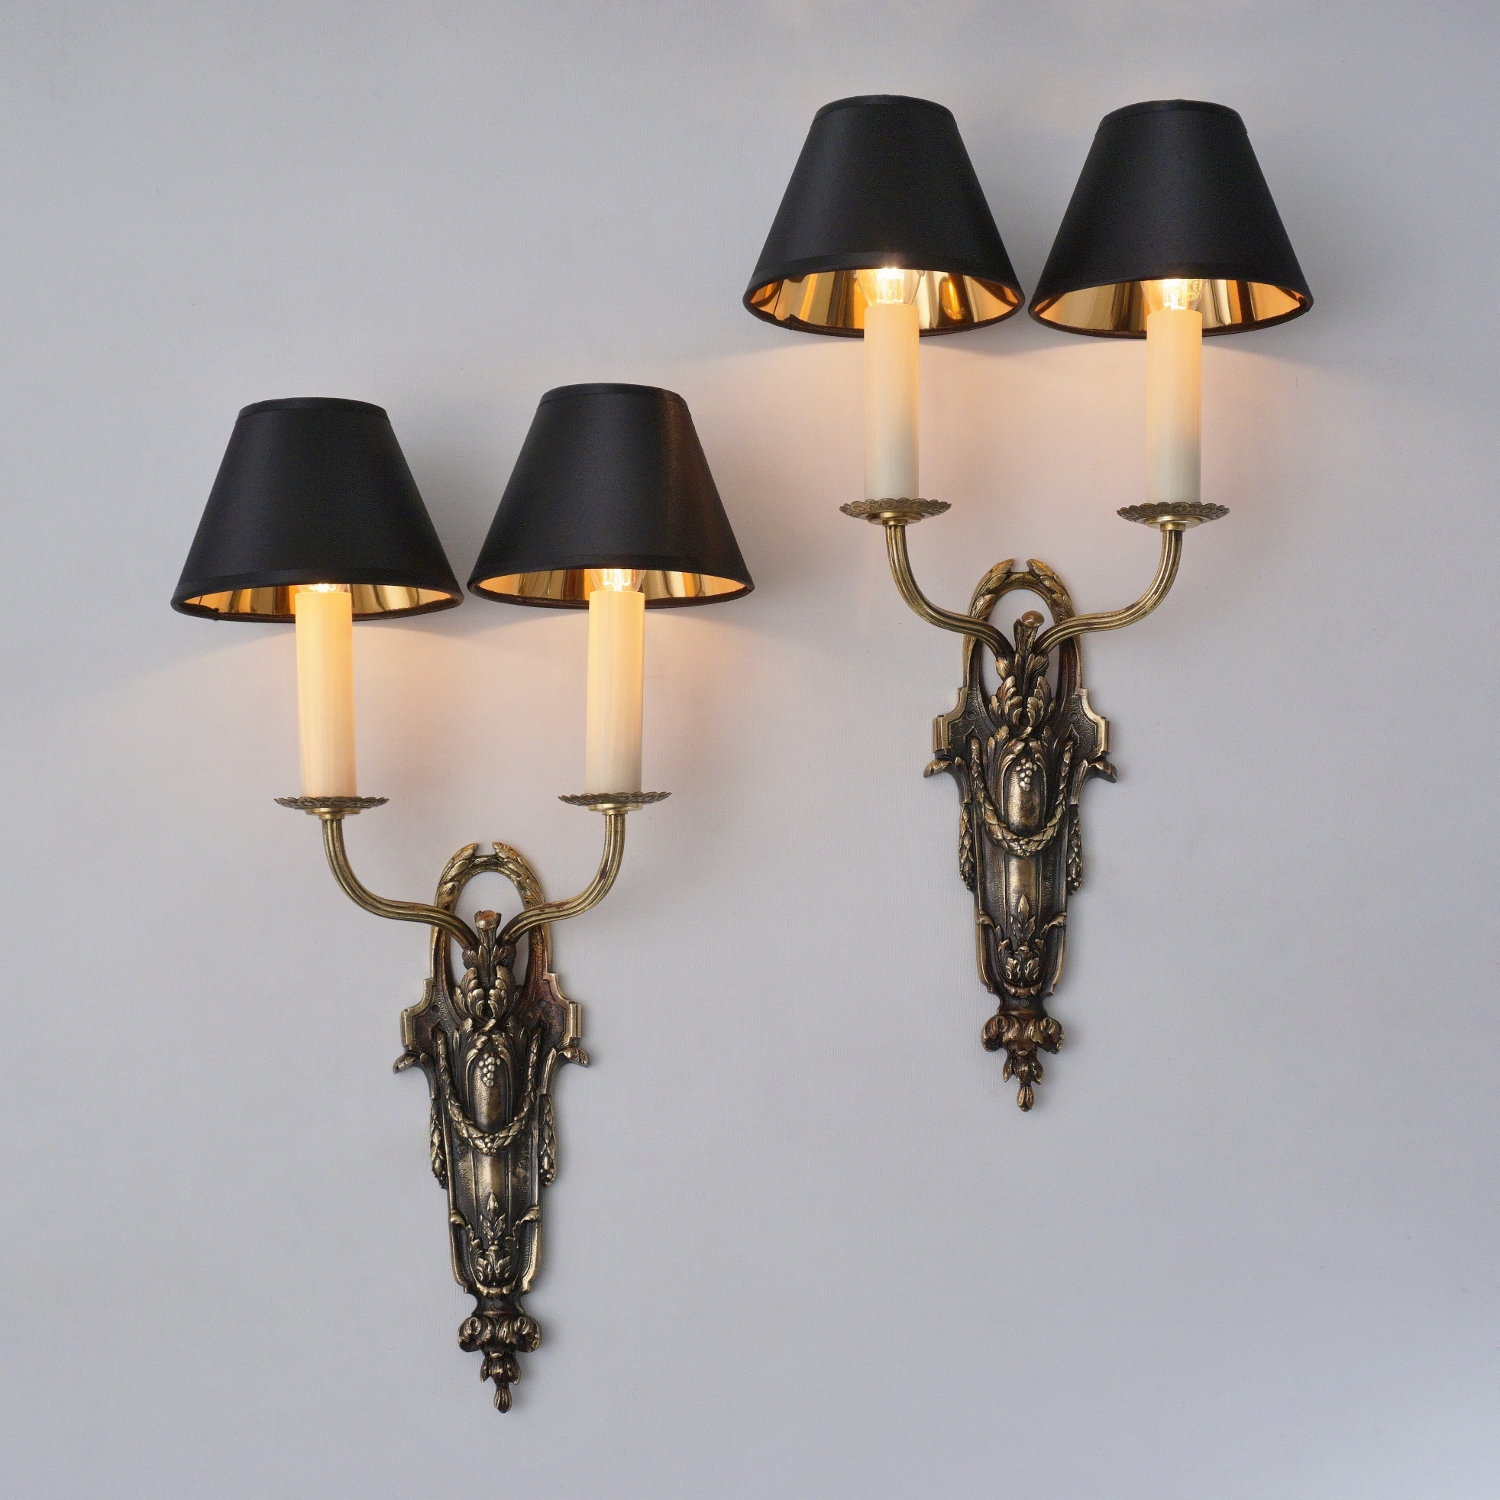 Pair antique sconces wall lights LB Deposé Leboullanger Freres, gilt  bronze, 1900 ca, French in Antique & Vintage Wall Lights / Sconces from  Roomscape